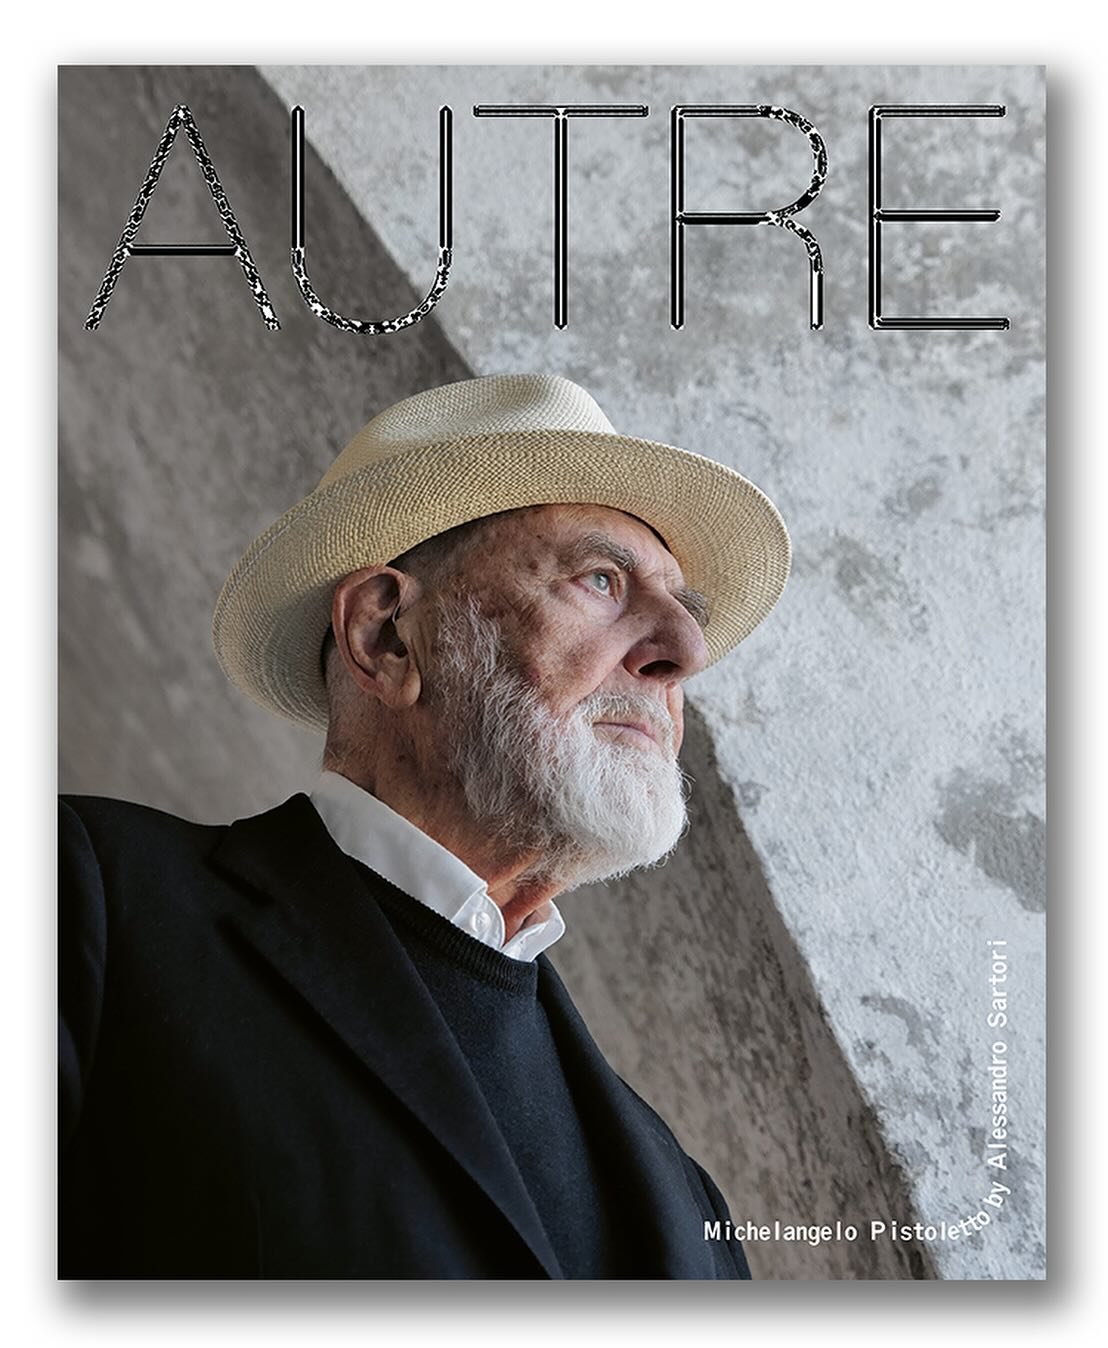 MICHELANGELO PISTOLETTO BY ALESSANDRO SARTORI. Autre is thrilled to present its S/S24 LEVITY ISSUE (preord3r 🔗 in biO), a 300+ page investigation into our zeitgeist of antigravity. Featuring our fourth cover, an in-depth profile on Arte Povera legen